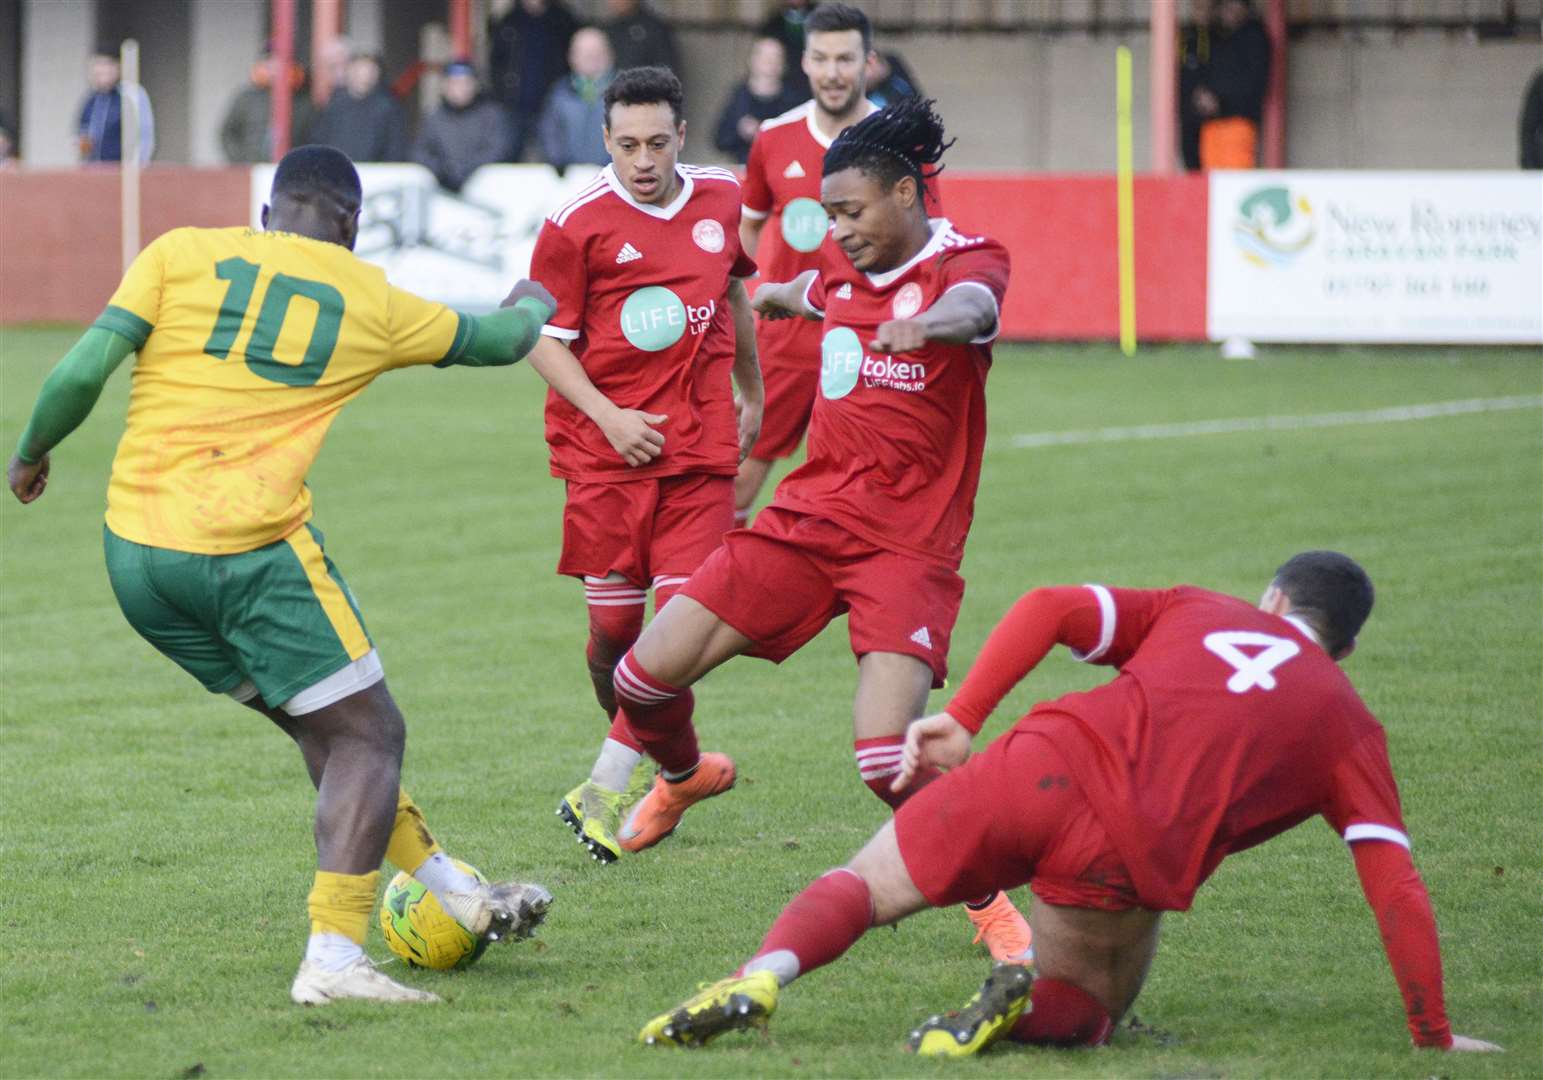 Hythe's Stephen Okoh puts in a challenge in against Ashford on Saturday Picture: Paul Amos